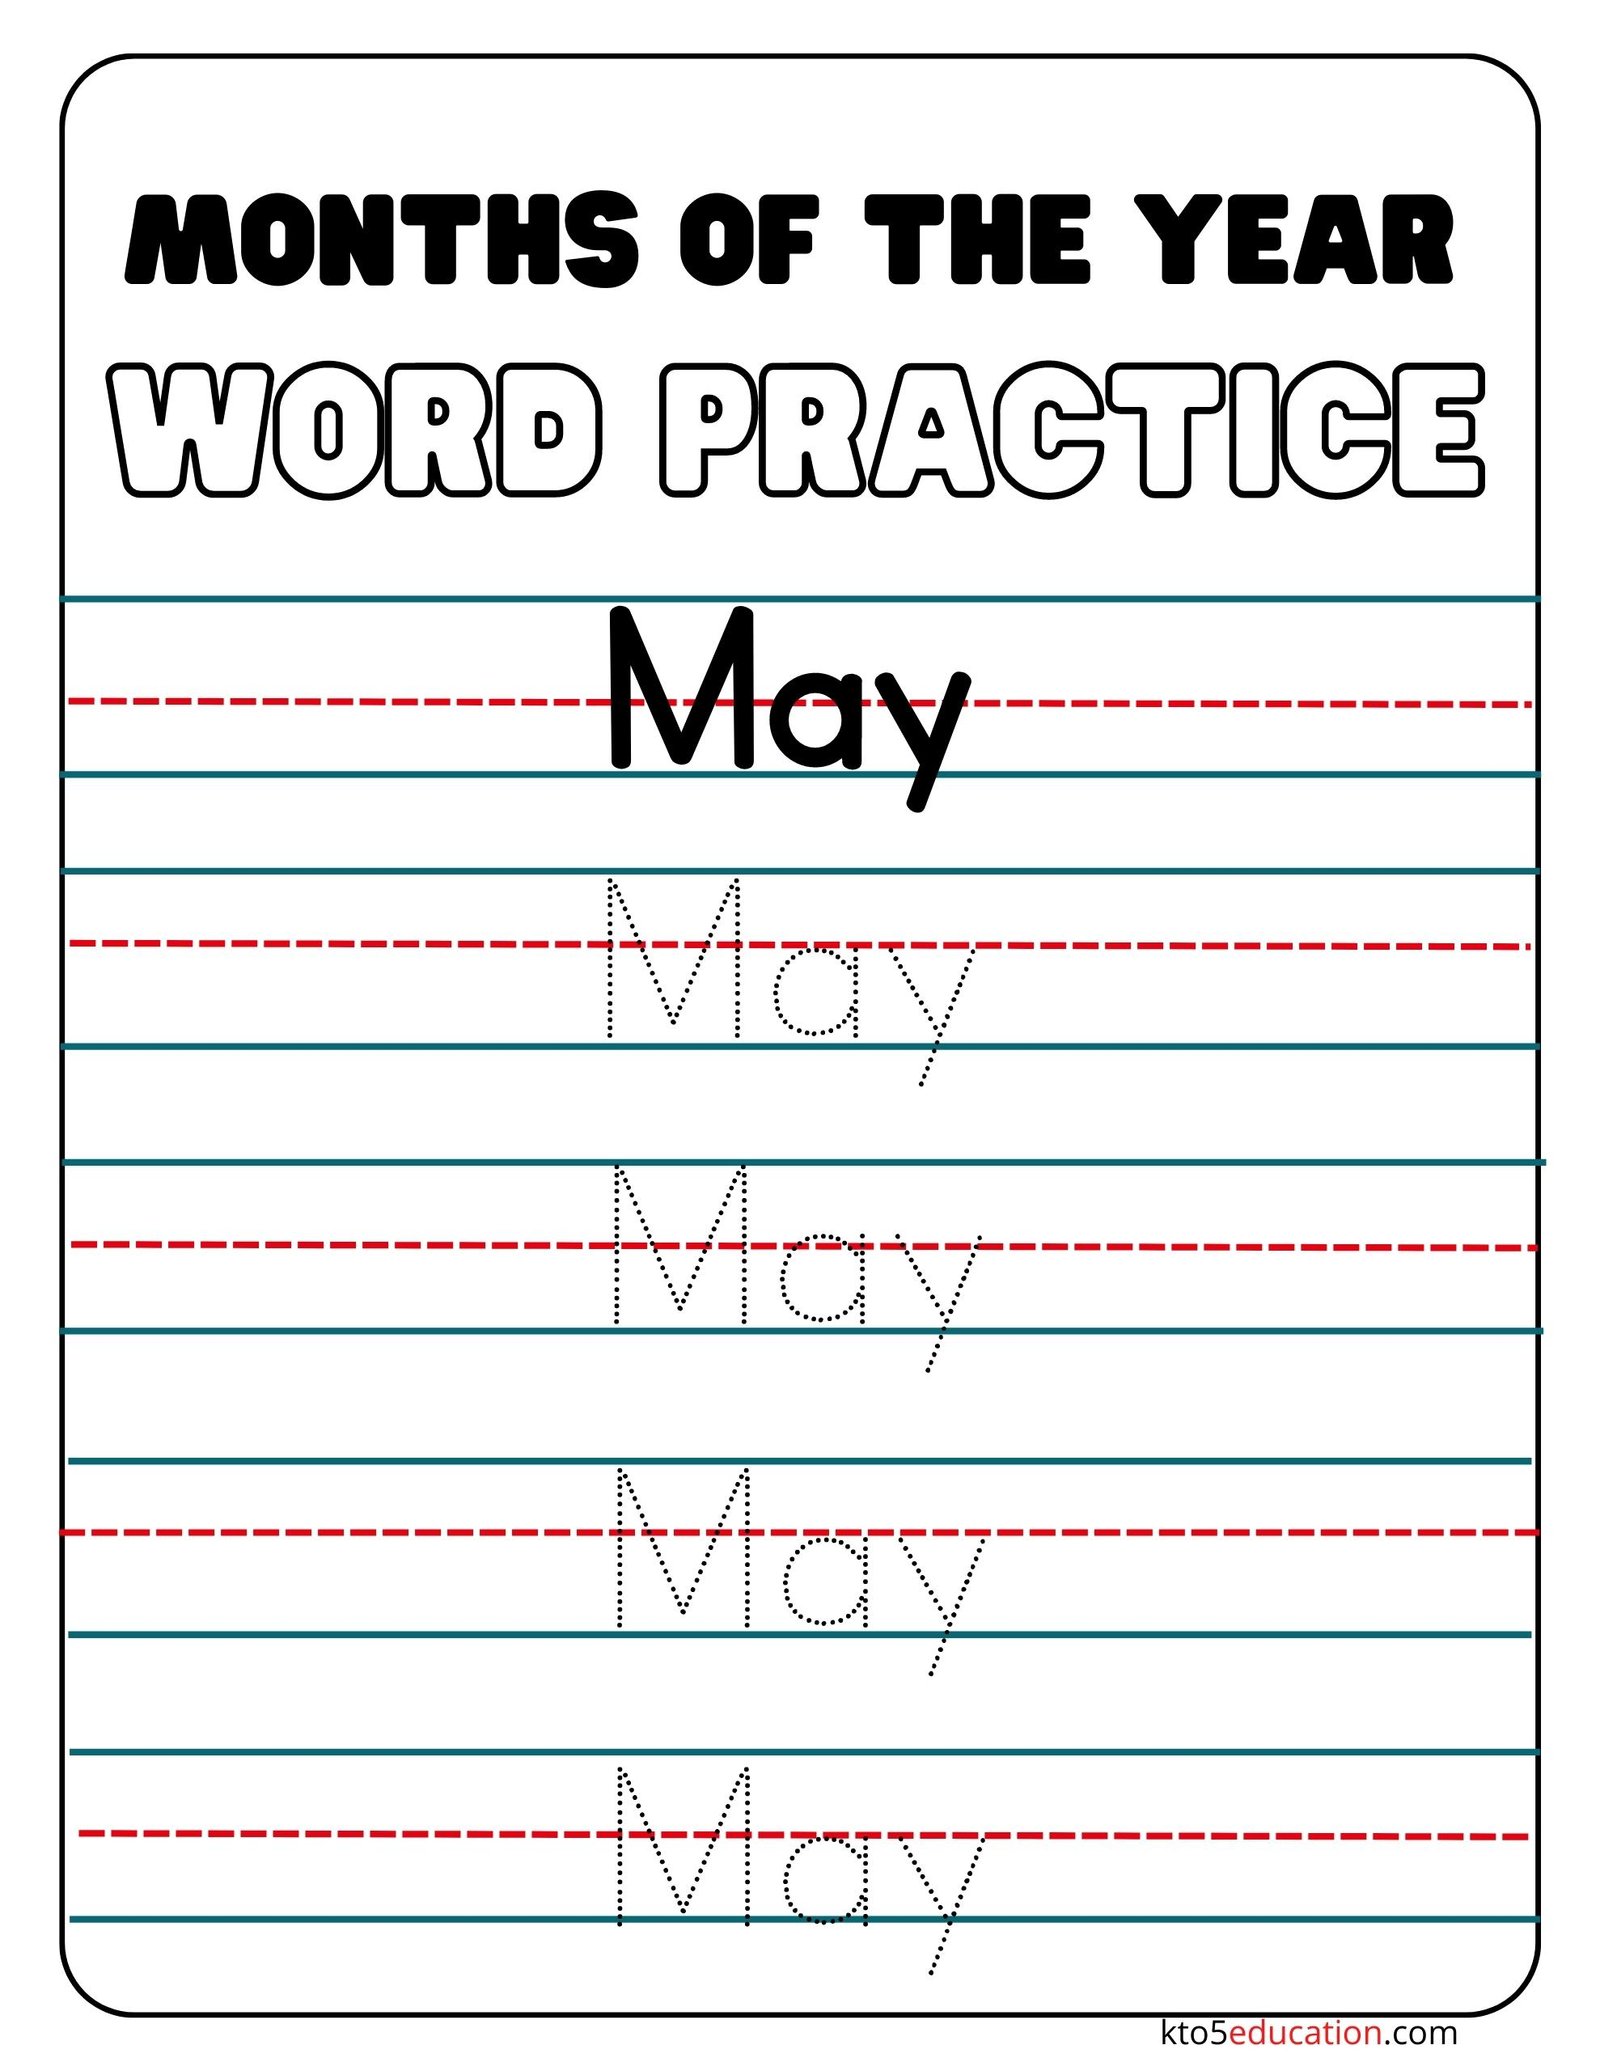 Months Of The Year May Word Practice